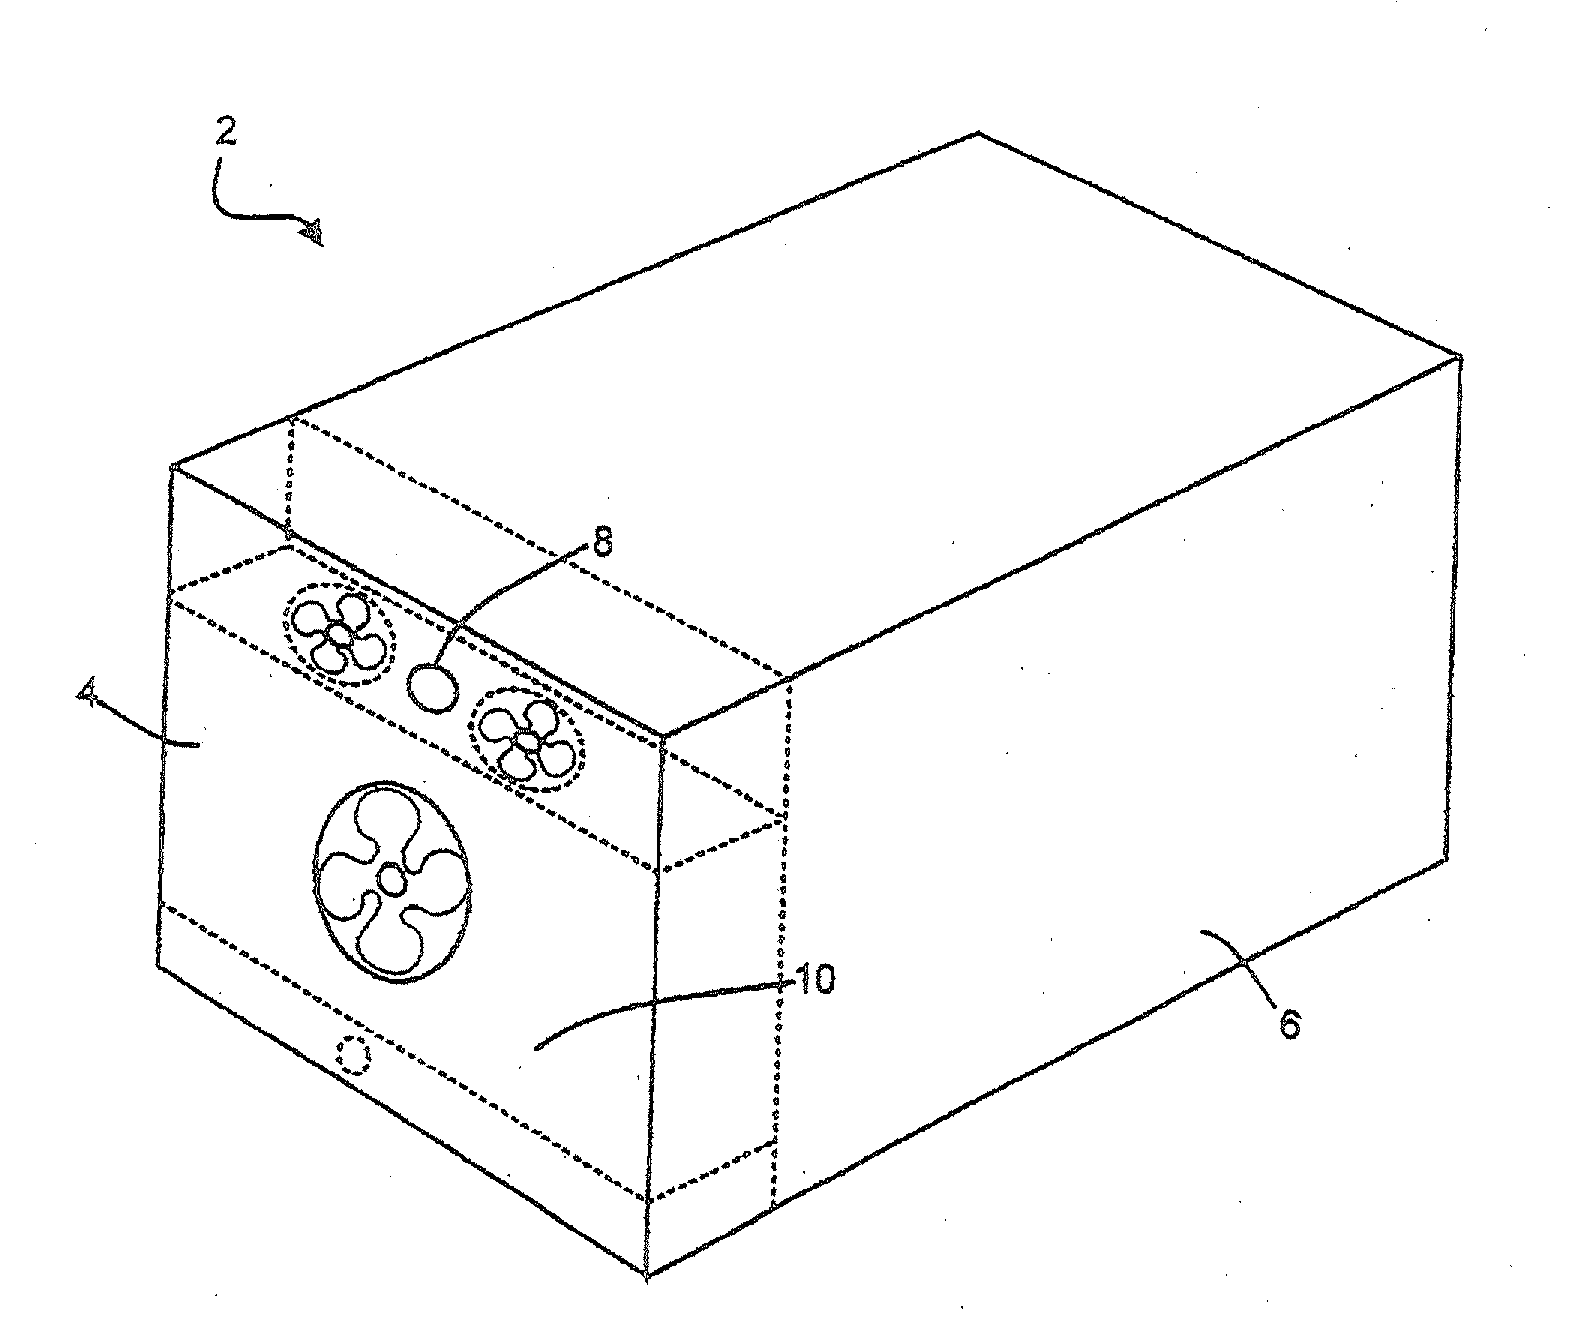 Capacity and pressure control in a transport refrigeration system